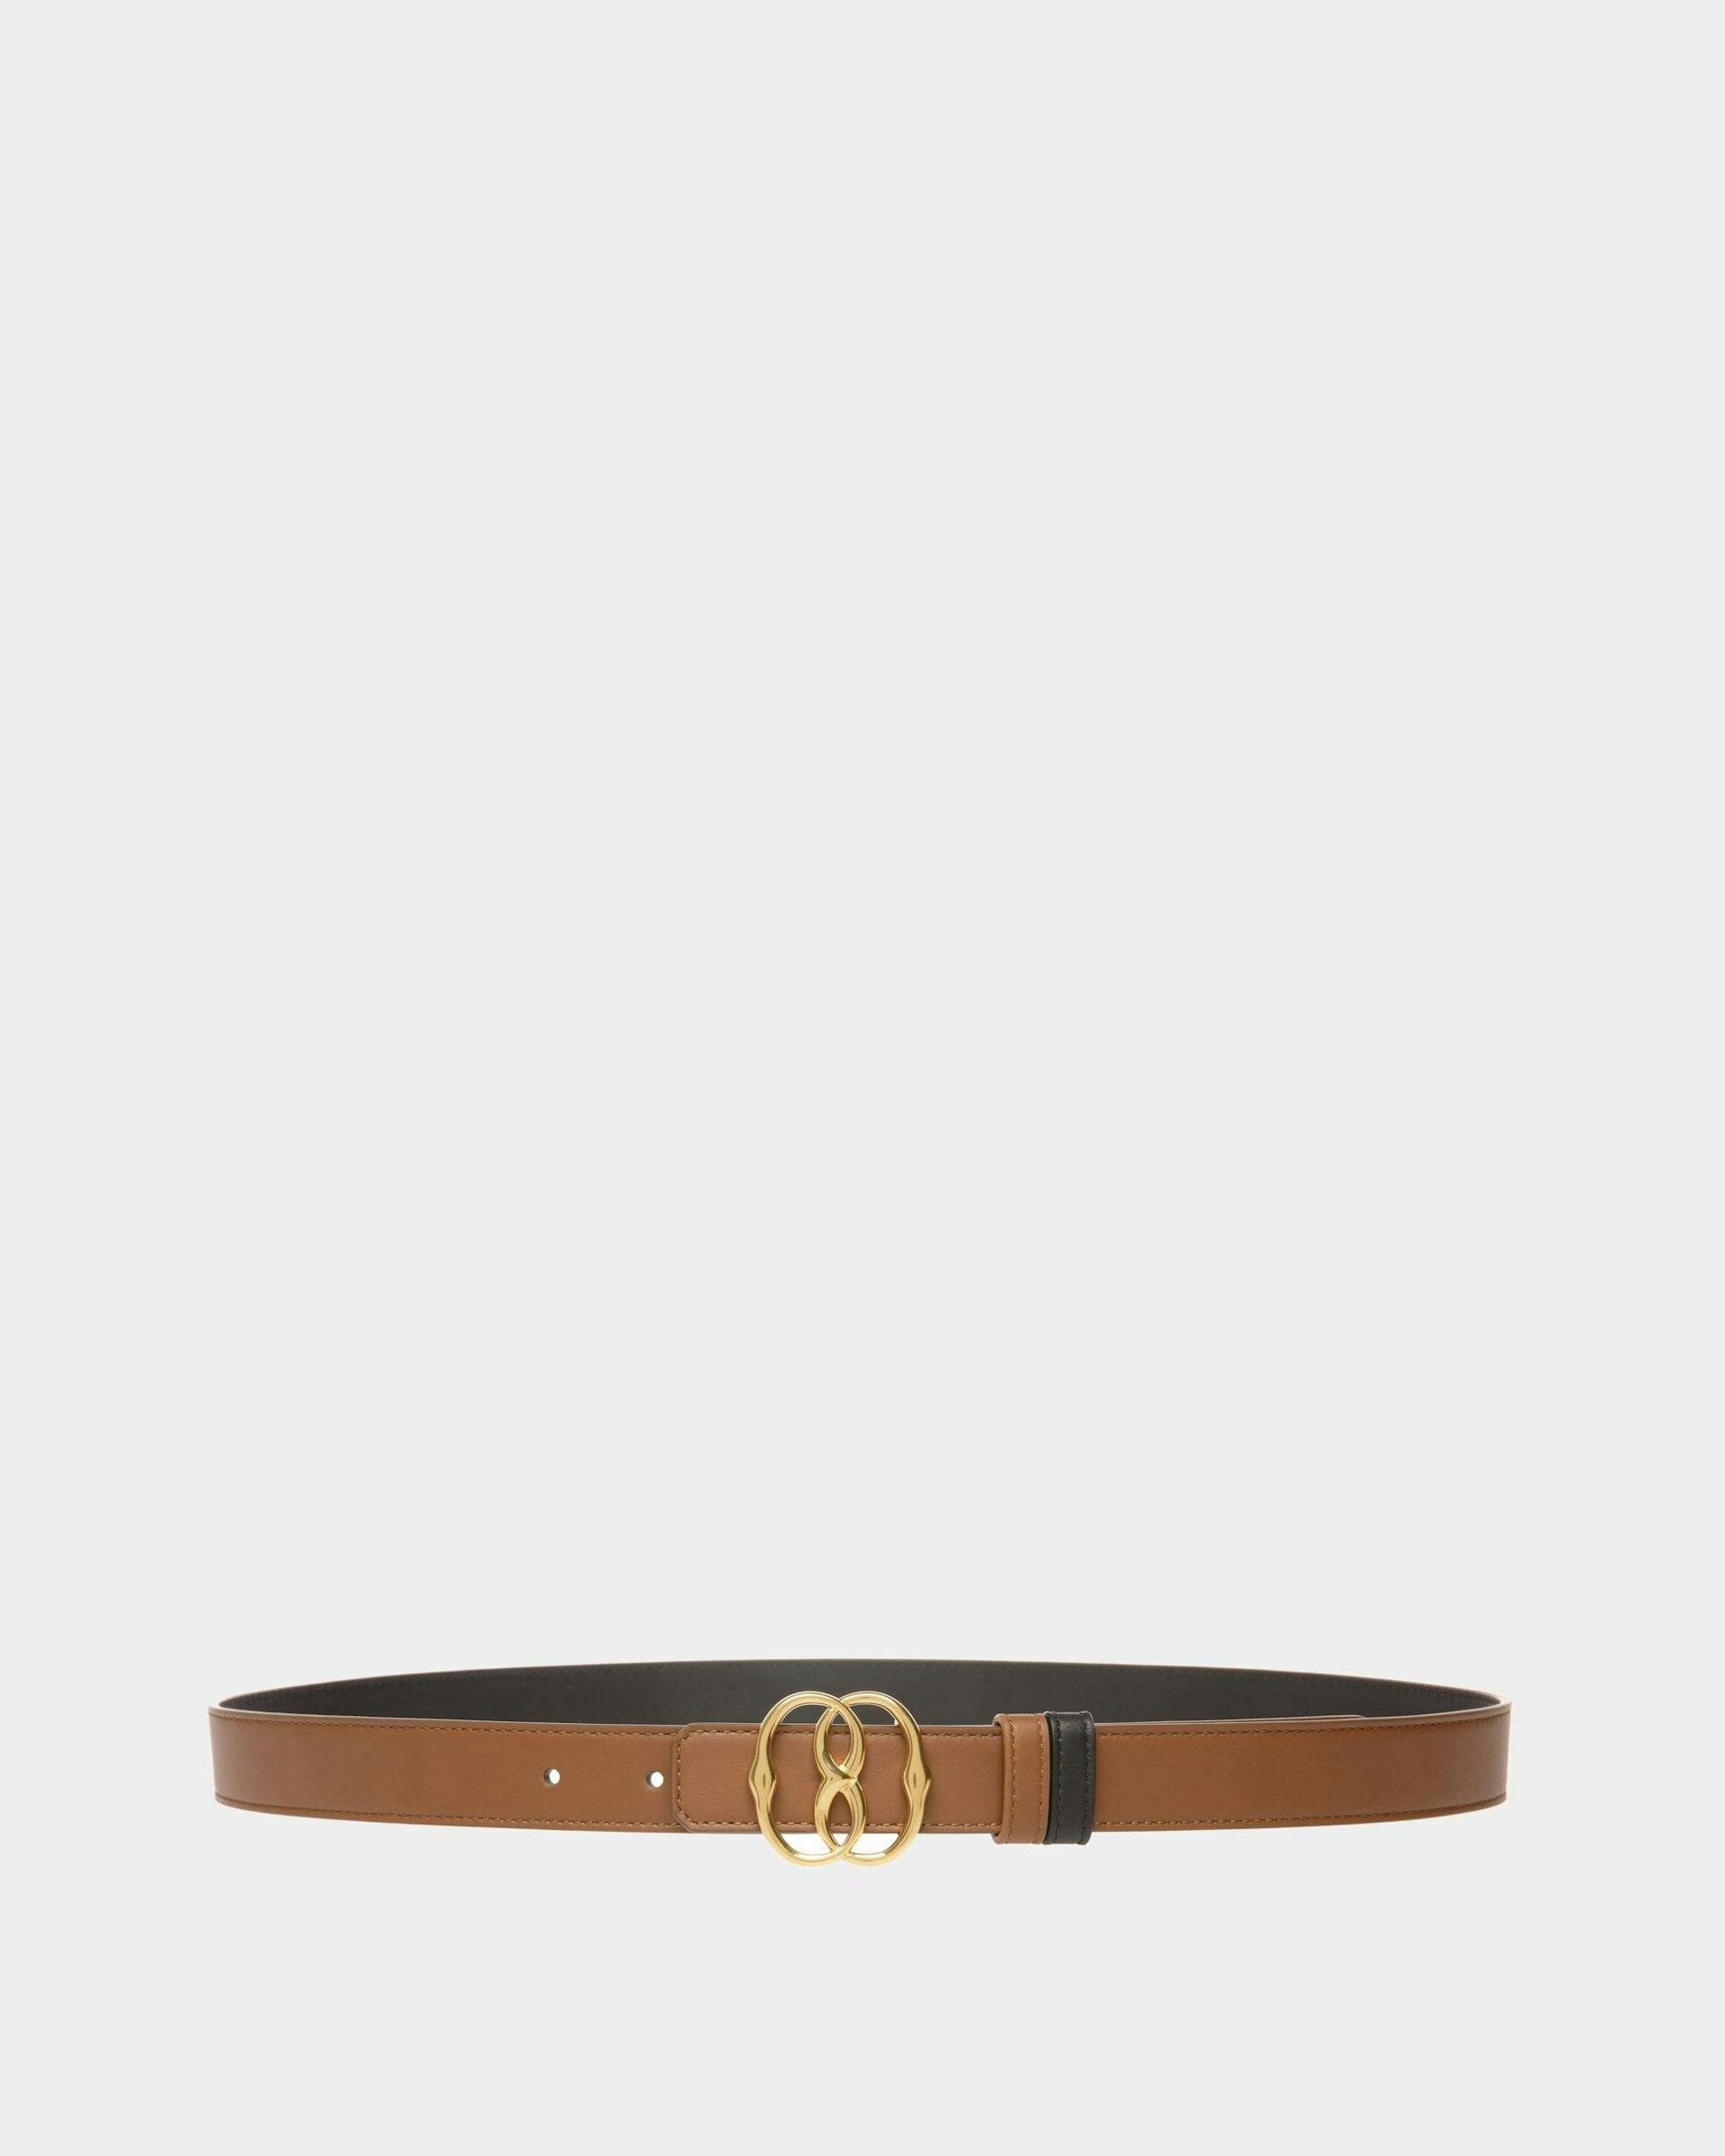 Women's Emblem 25mm Belt In Brown Leather | Bally | Still Life Front